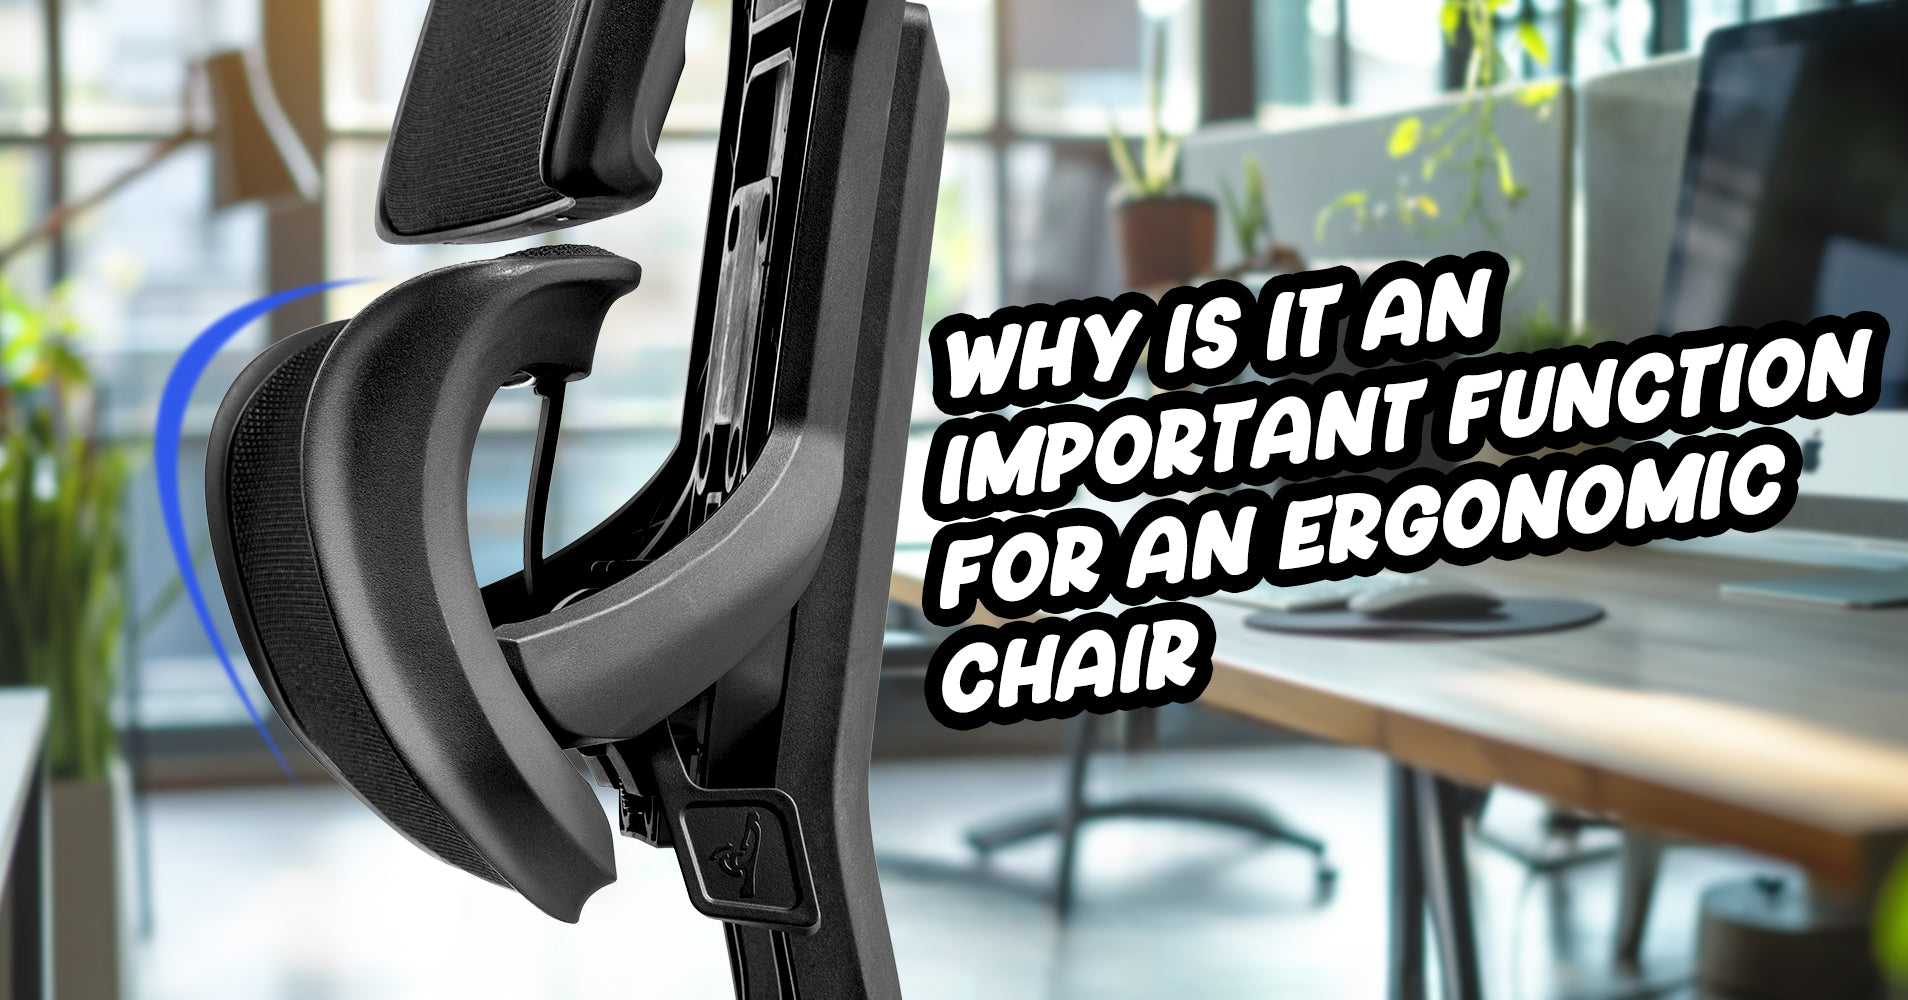 What is a Lumbar Support and Why is it an Important Function for an Ergonomic Chair